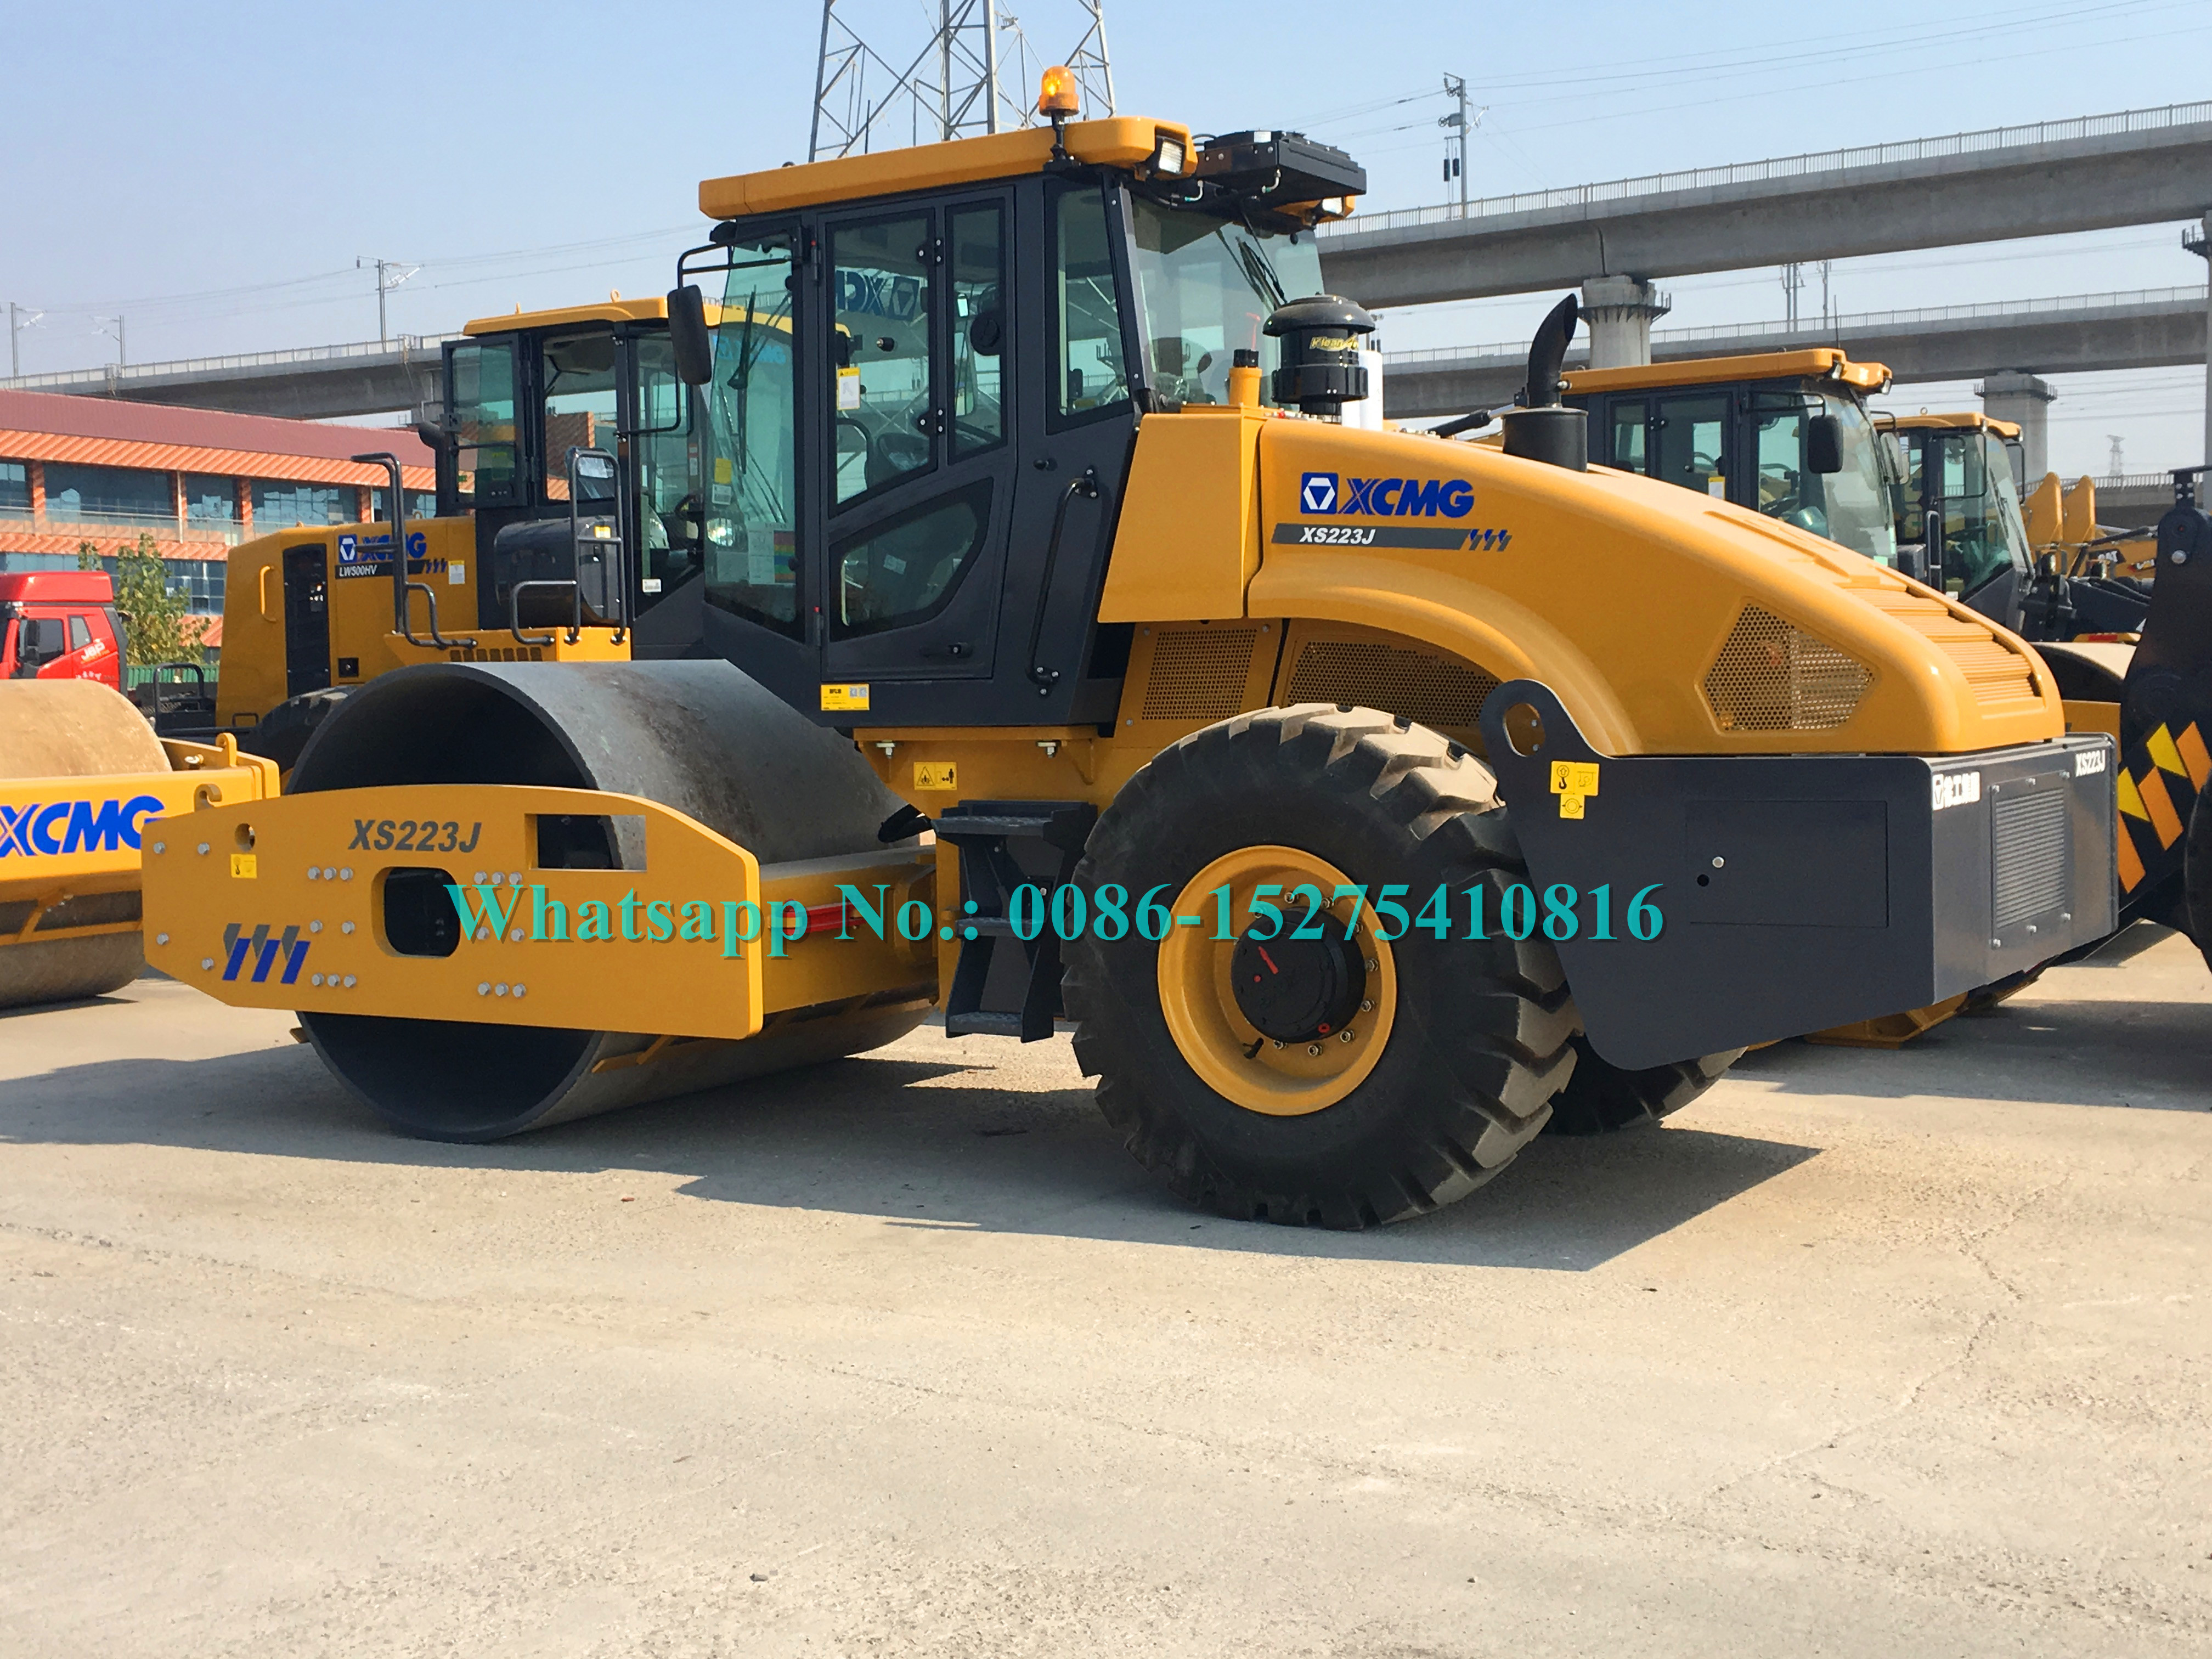 XCMG Road Construction Machinery 22 Ton Single Drum Roller Compactor S223J/XS223JE Model